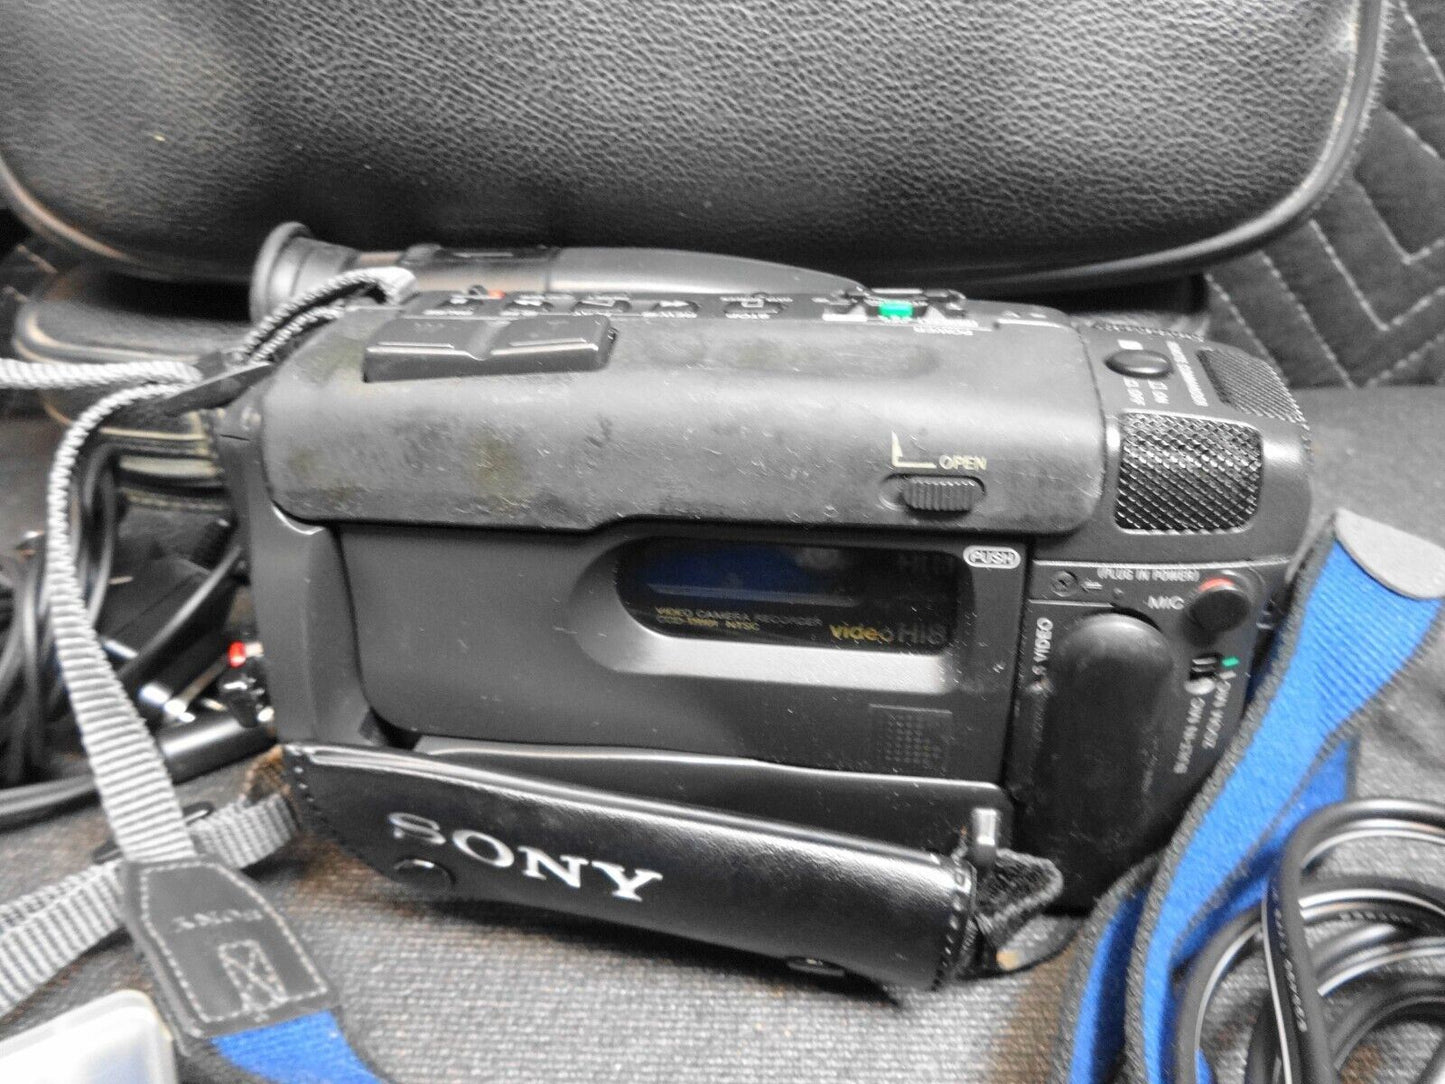 Sony CCD-TR101 Camcorder w/ Charger, Batteries, Cables, Remote & Case